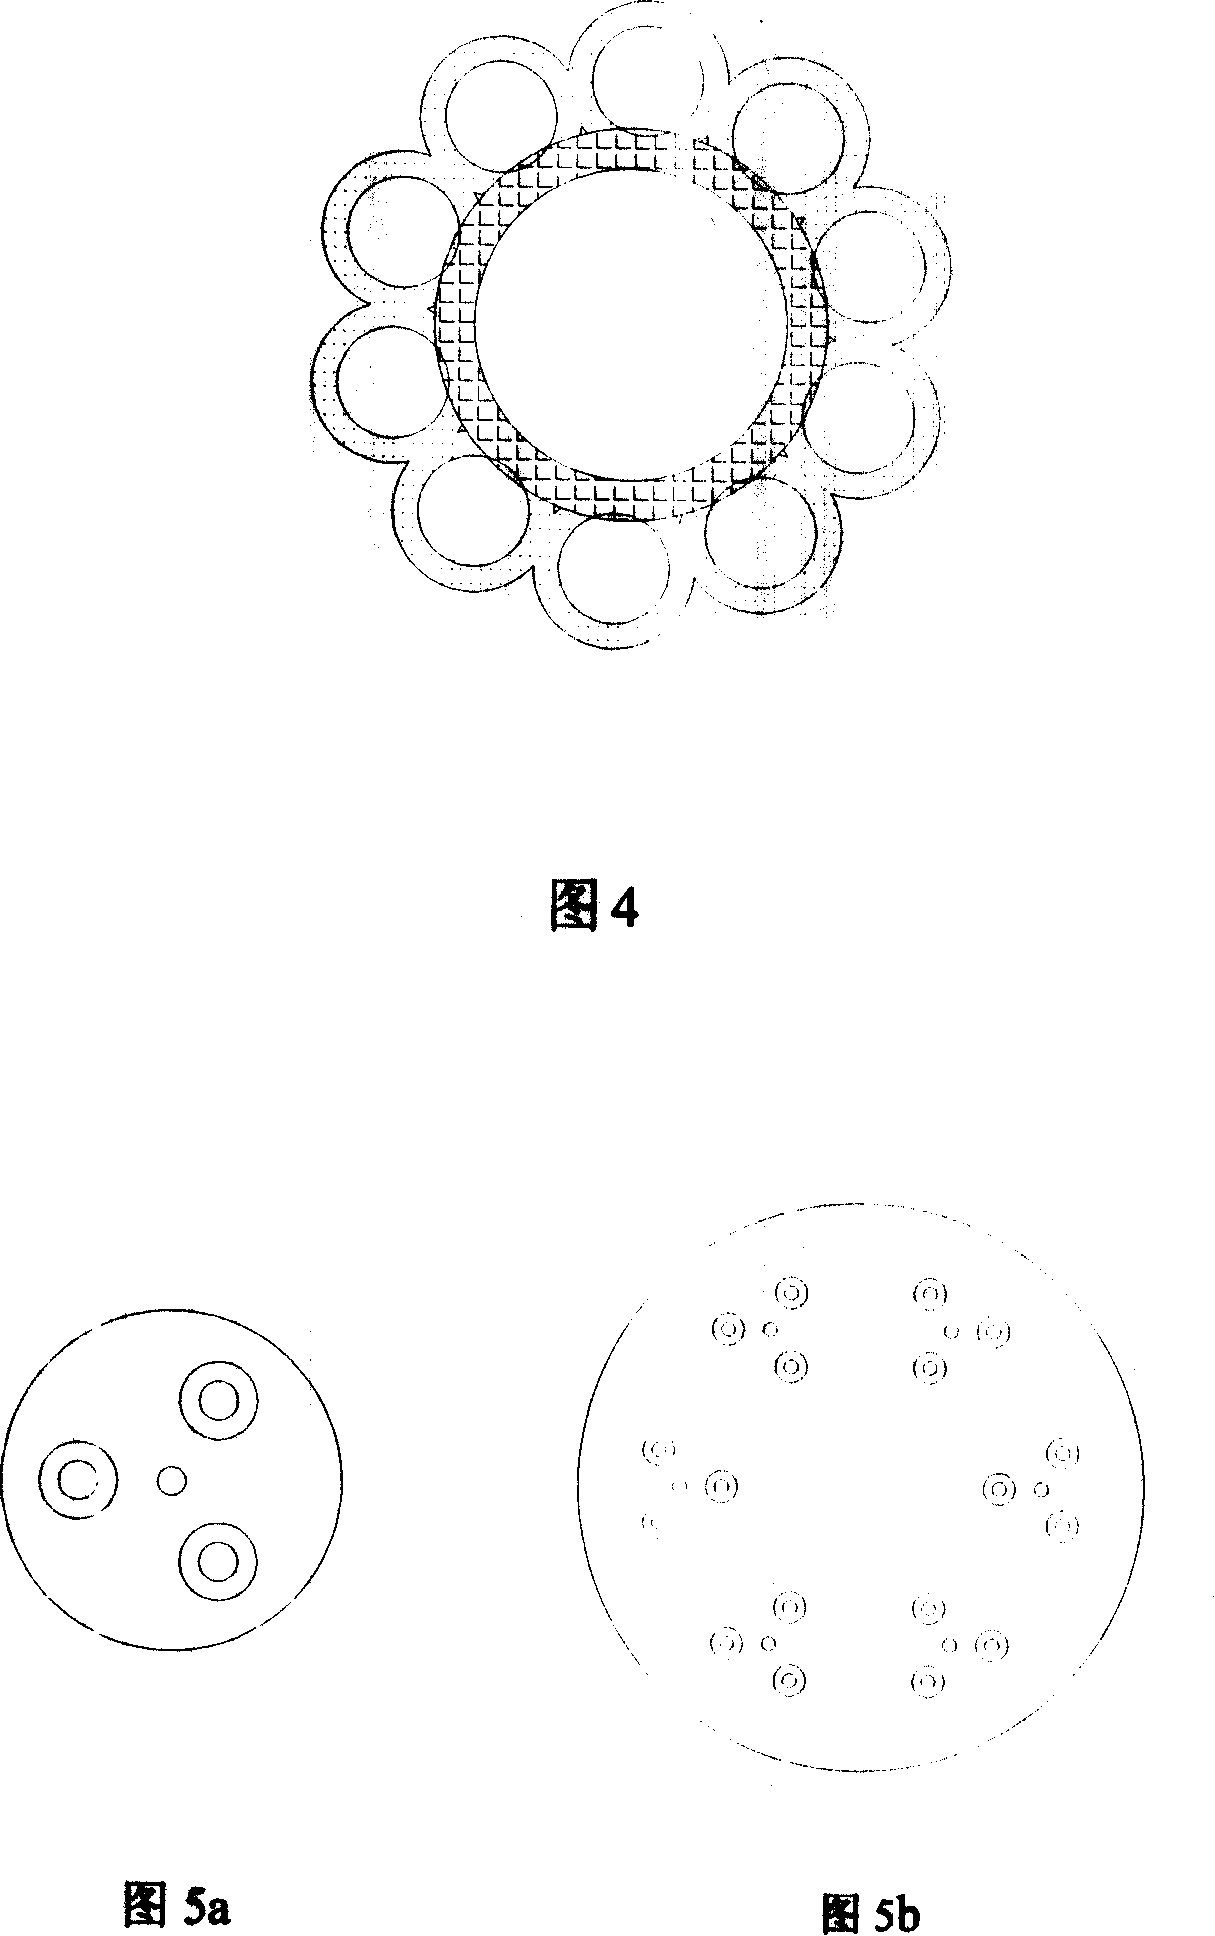 Bunchiness hollow fiber film and method of preparing the same